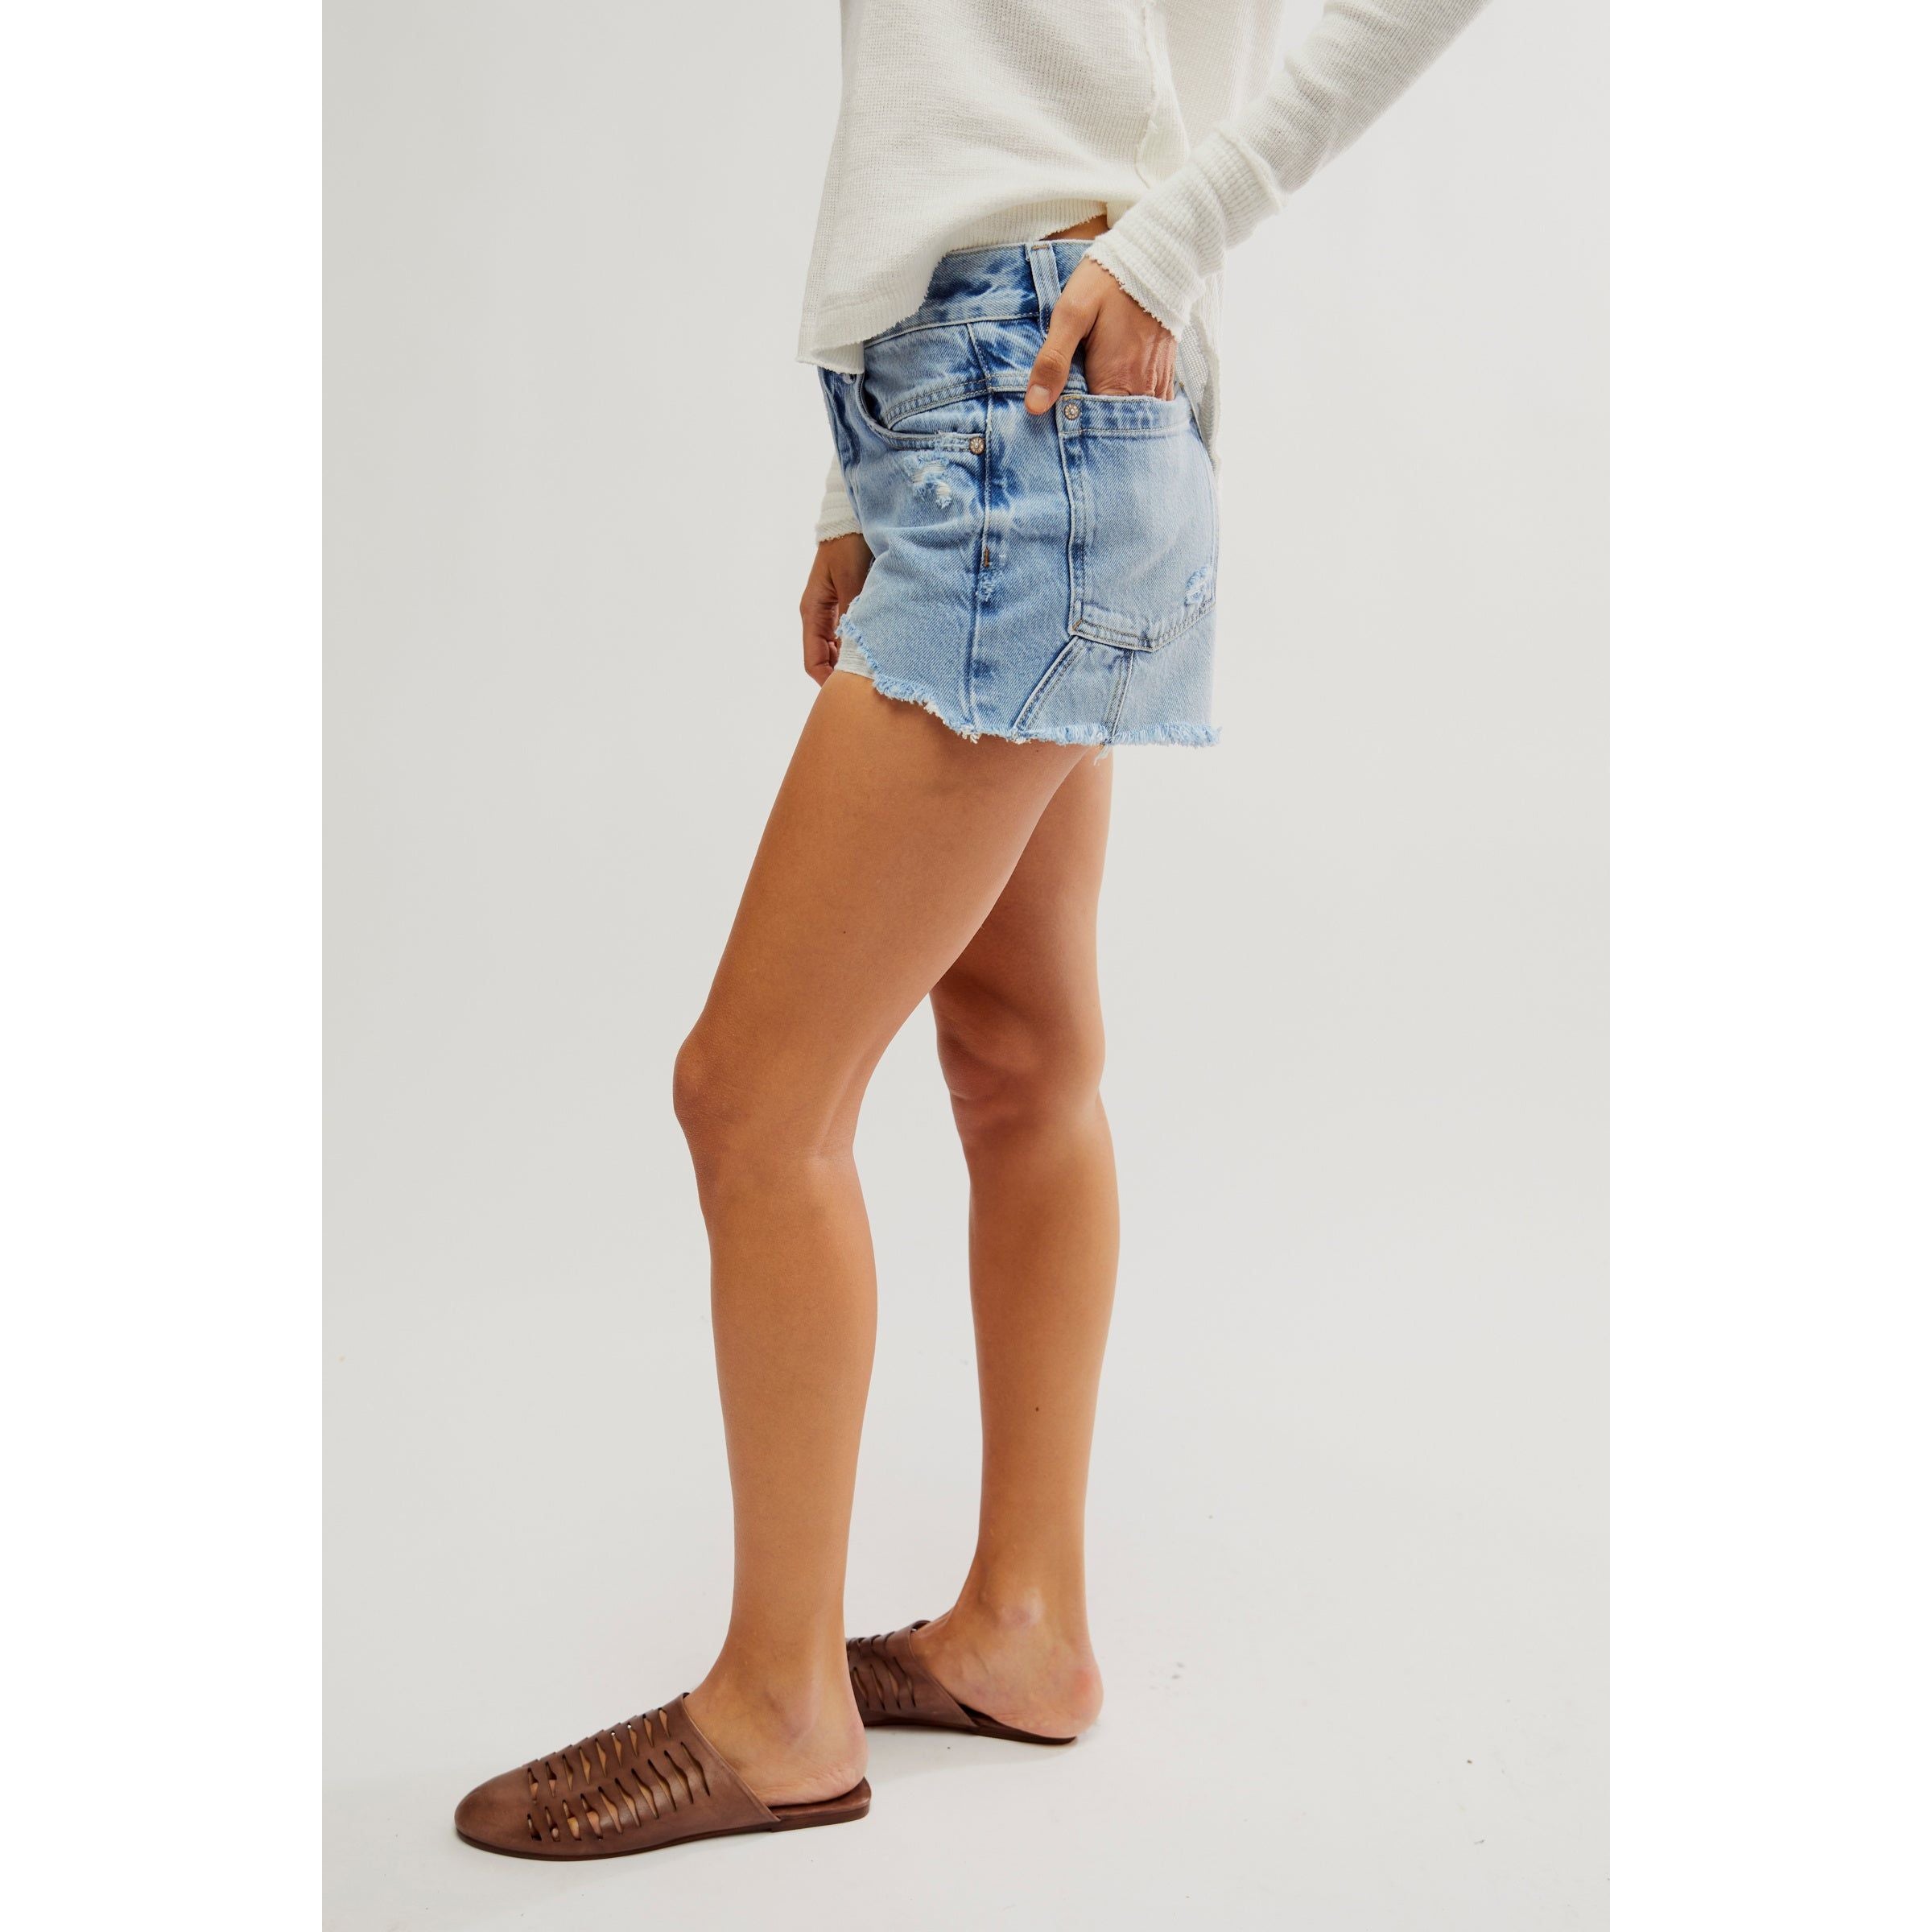 Free People - Now Or Never Denim Shorts in Moon Child